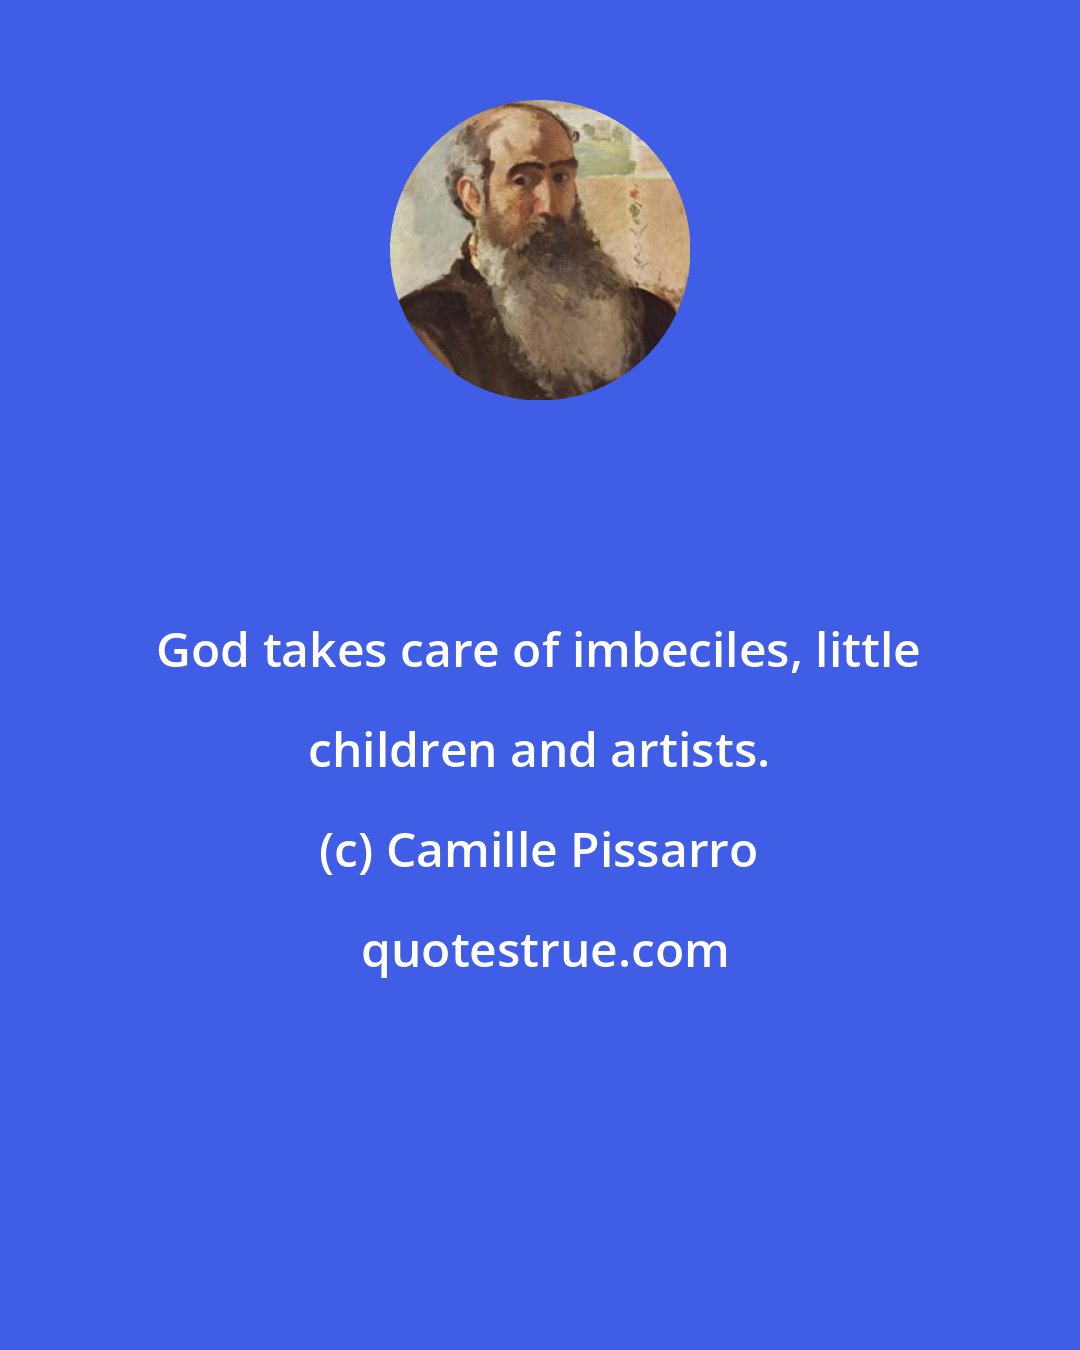 Camille Pissarro: God takes care of imbeciles, little children and artists.